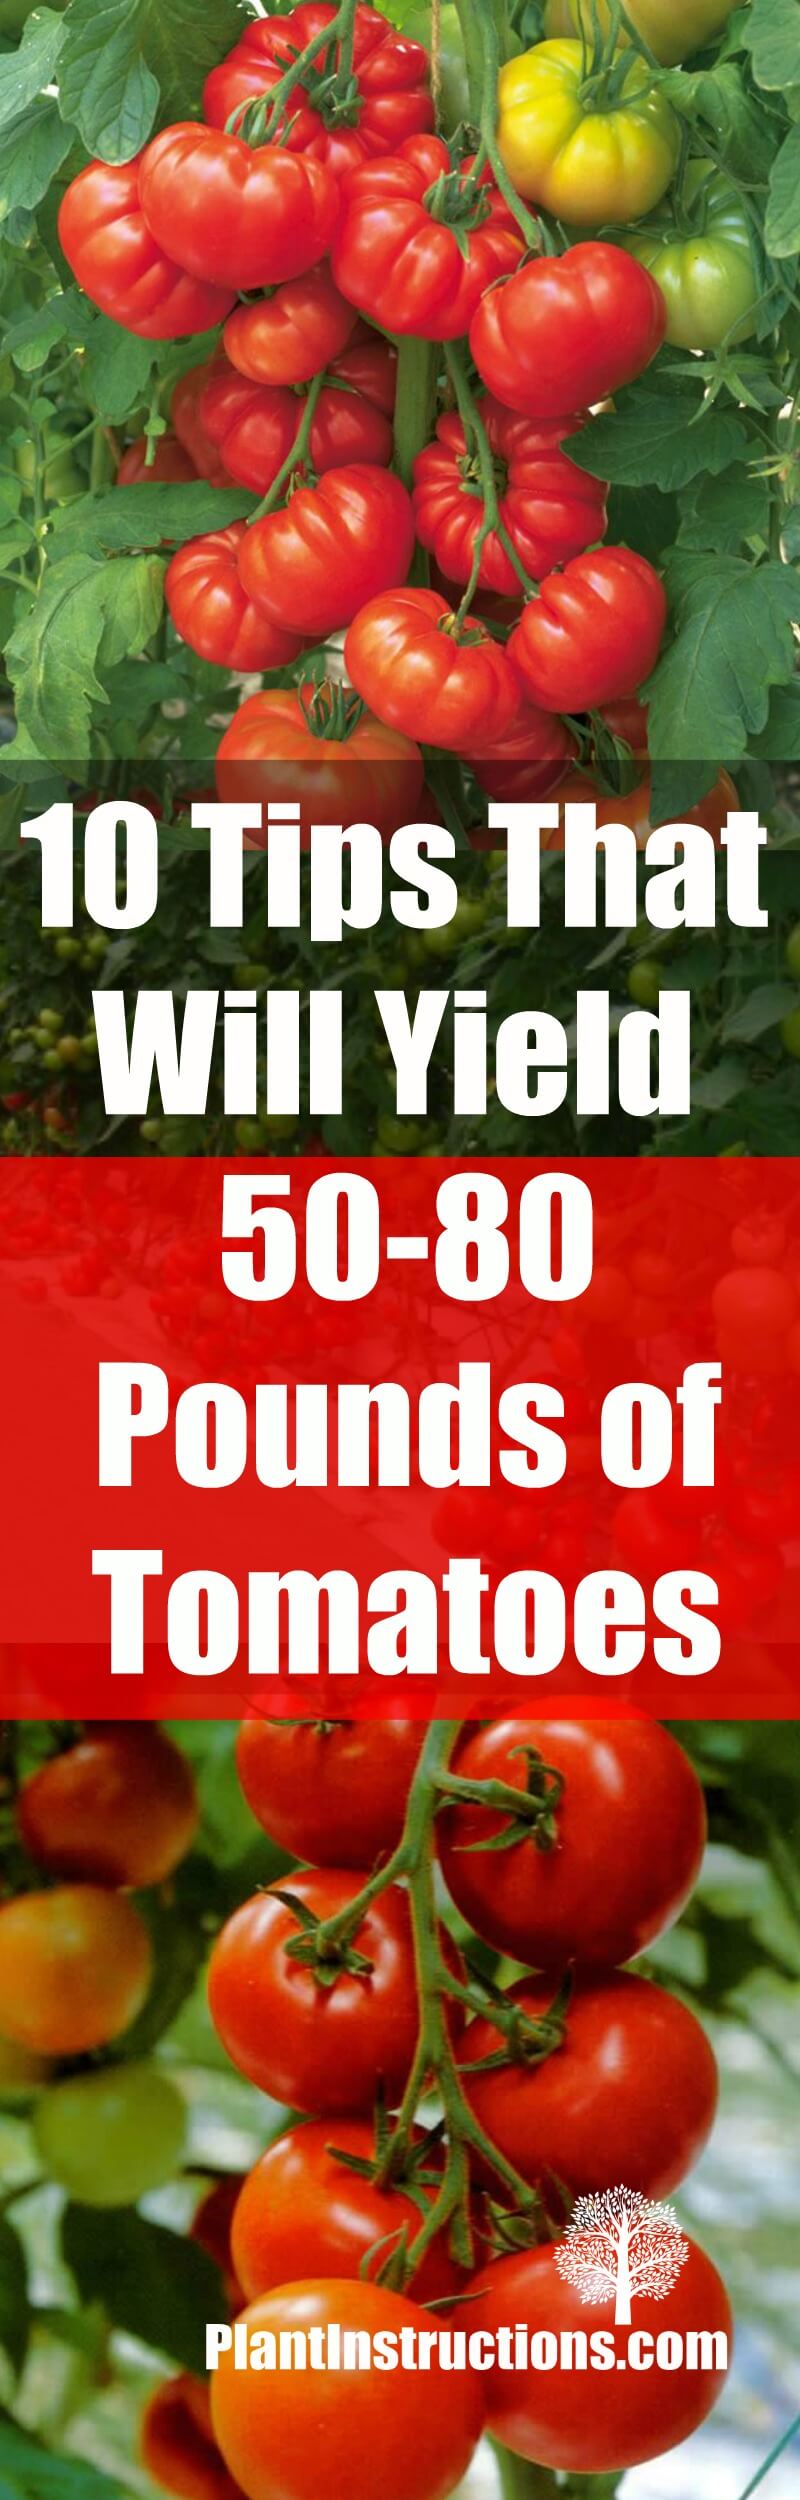 tips that will yield a lot of tomatoes